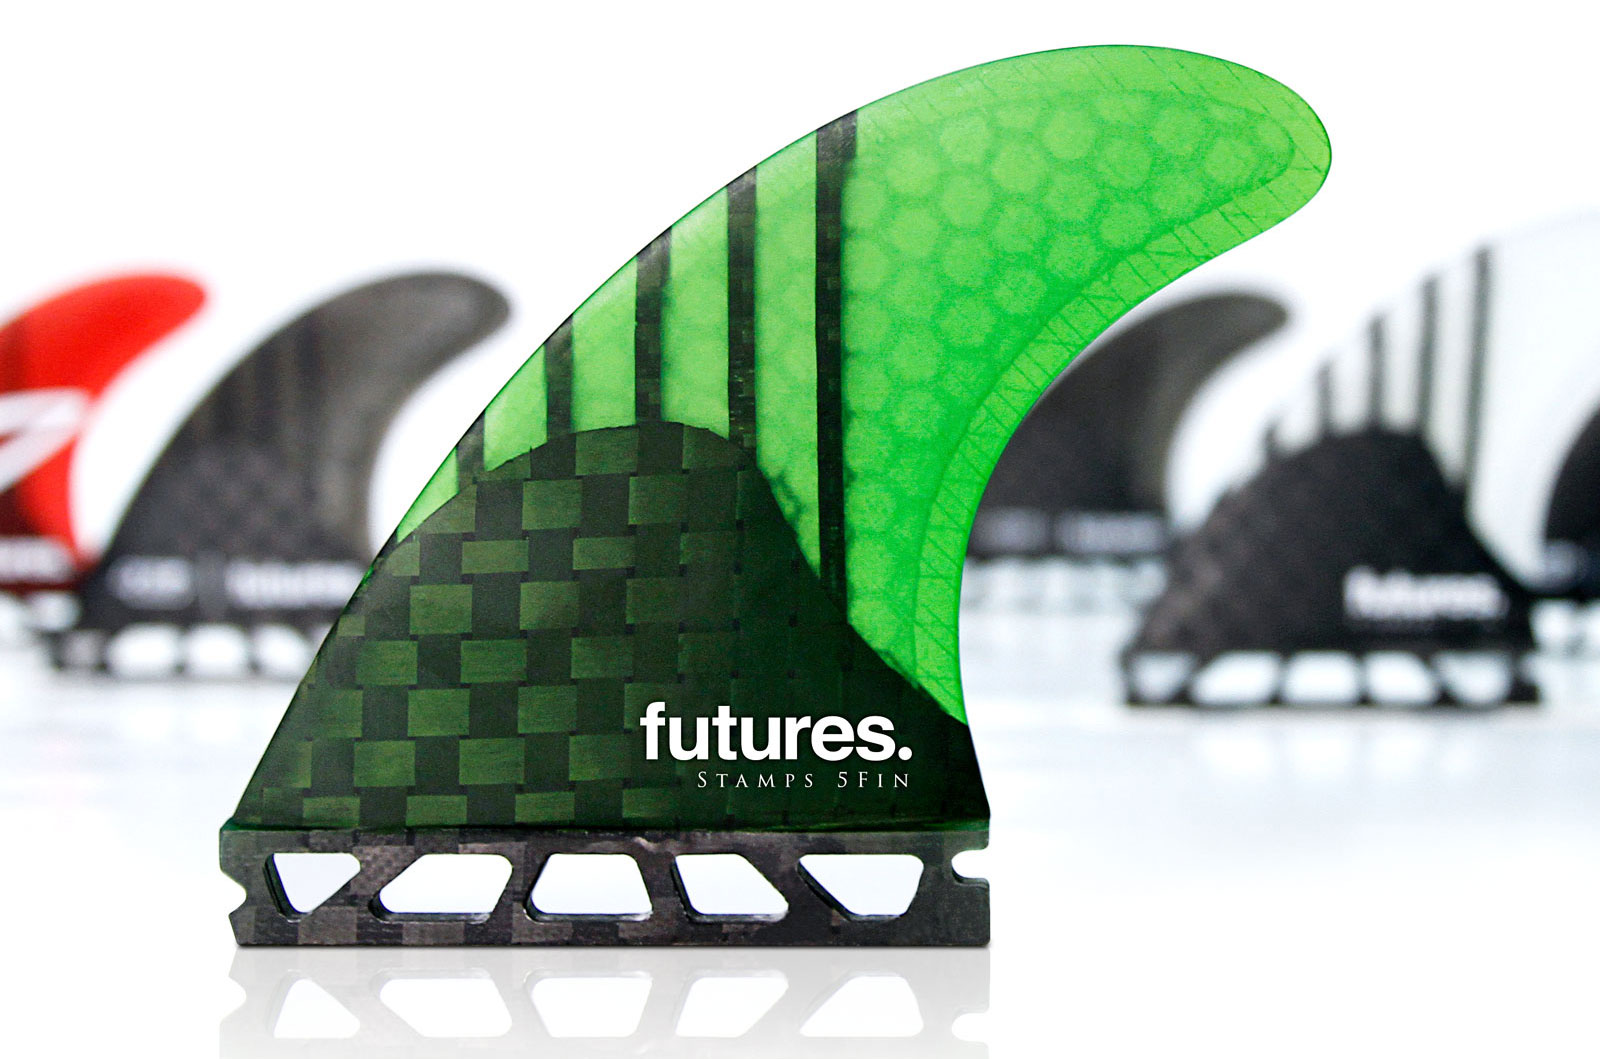 FUTURES FINS - Surfboard Fins designed for speed, balance, and control